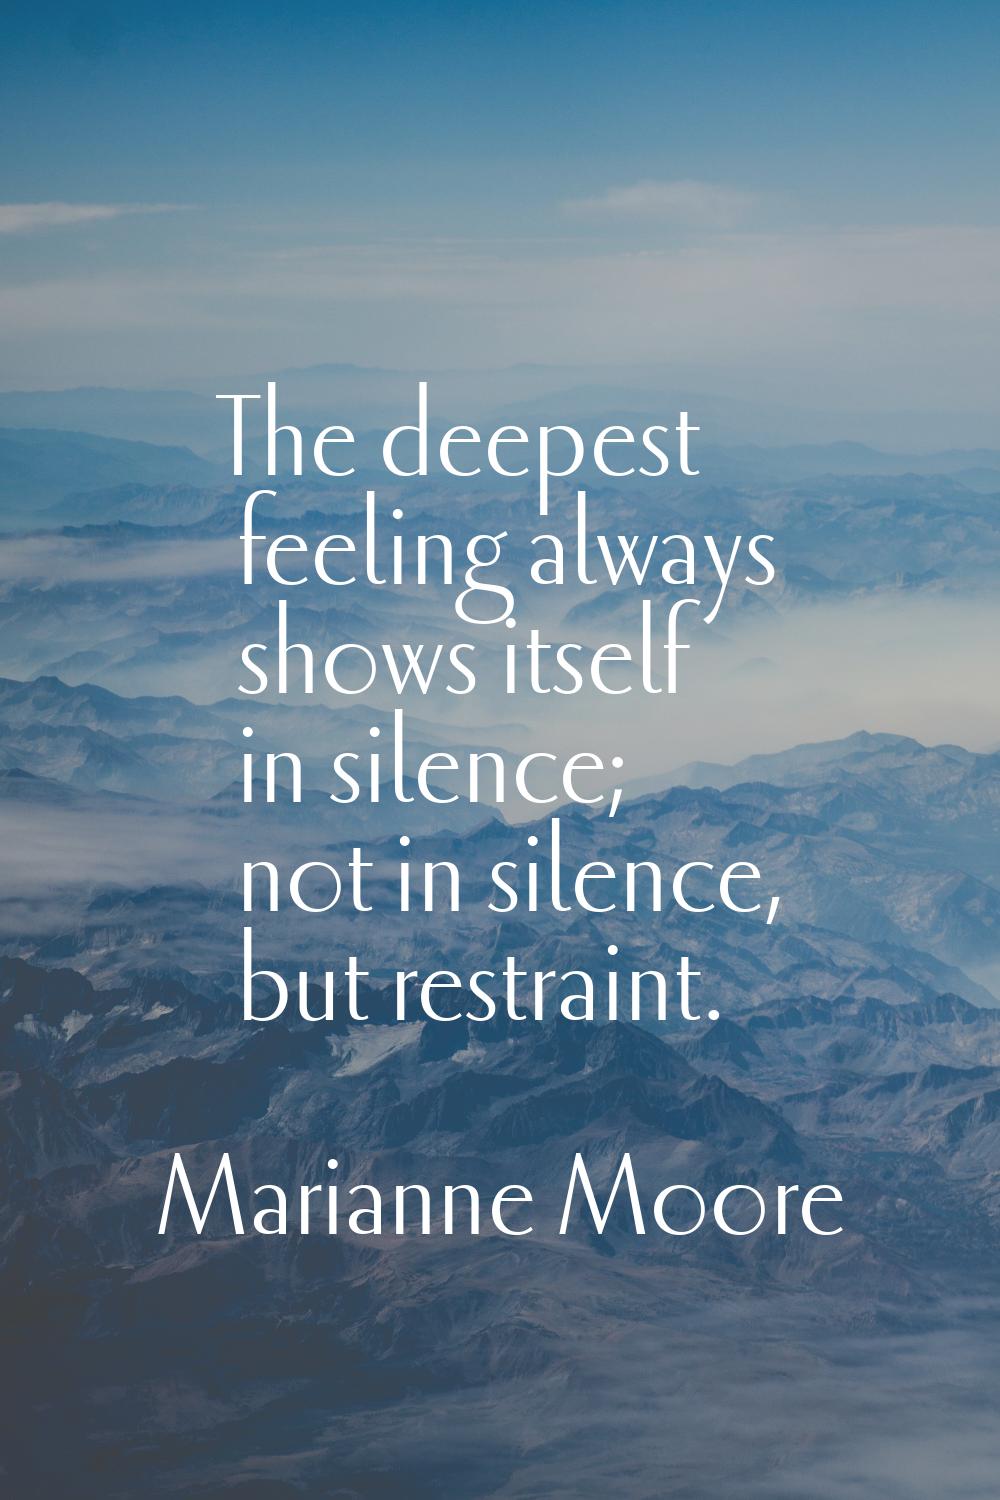 The deepest feeling always shows itself in silence; not in silence, but restraint.